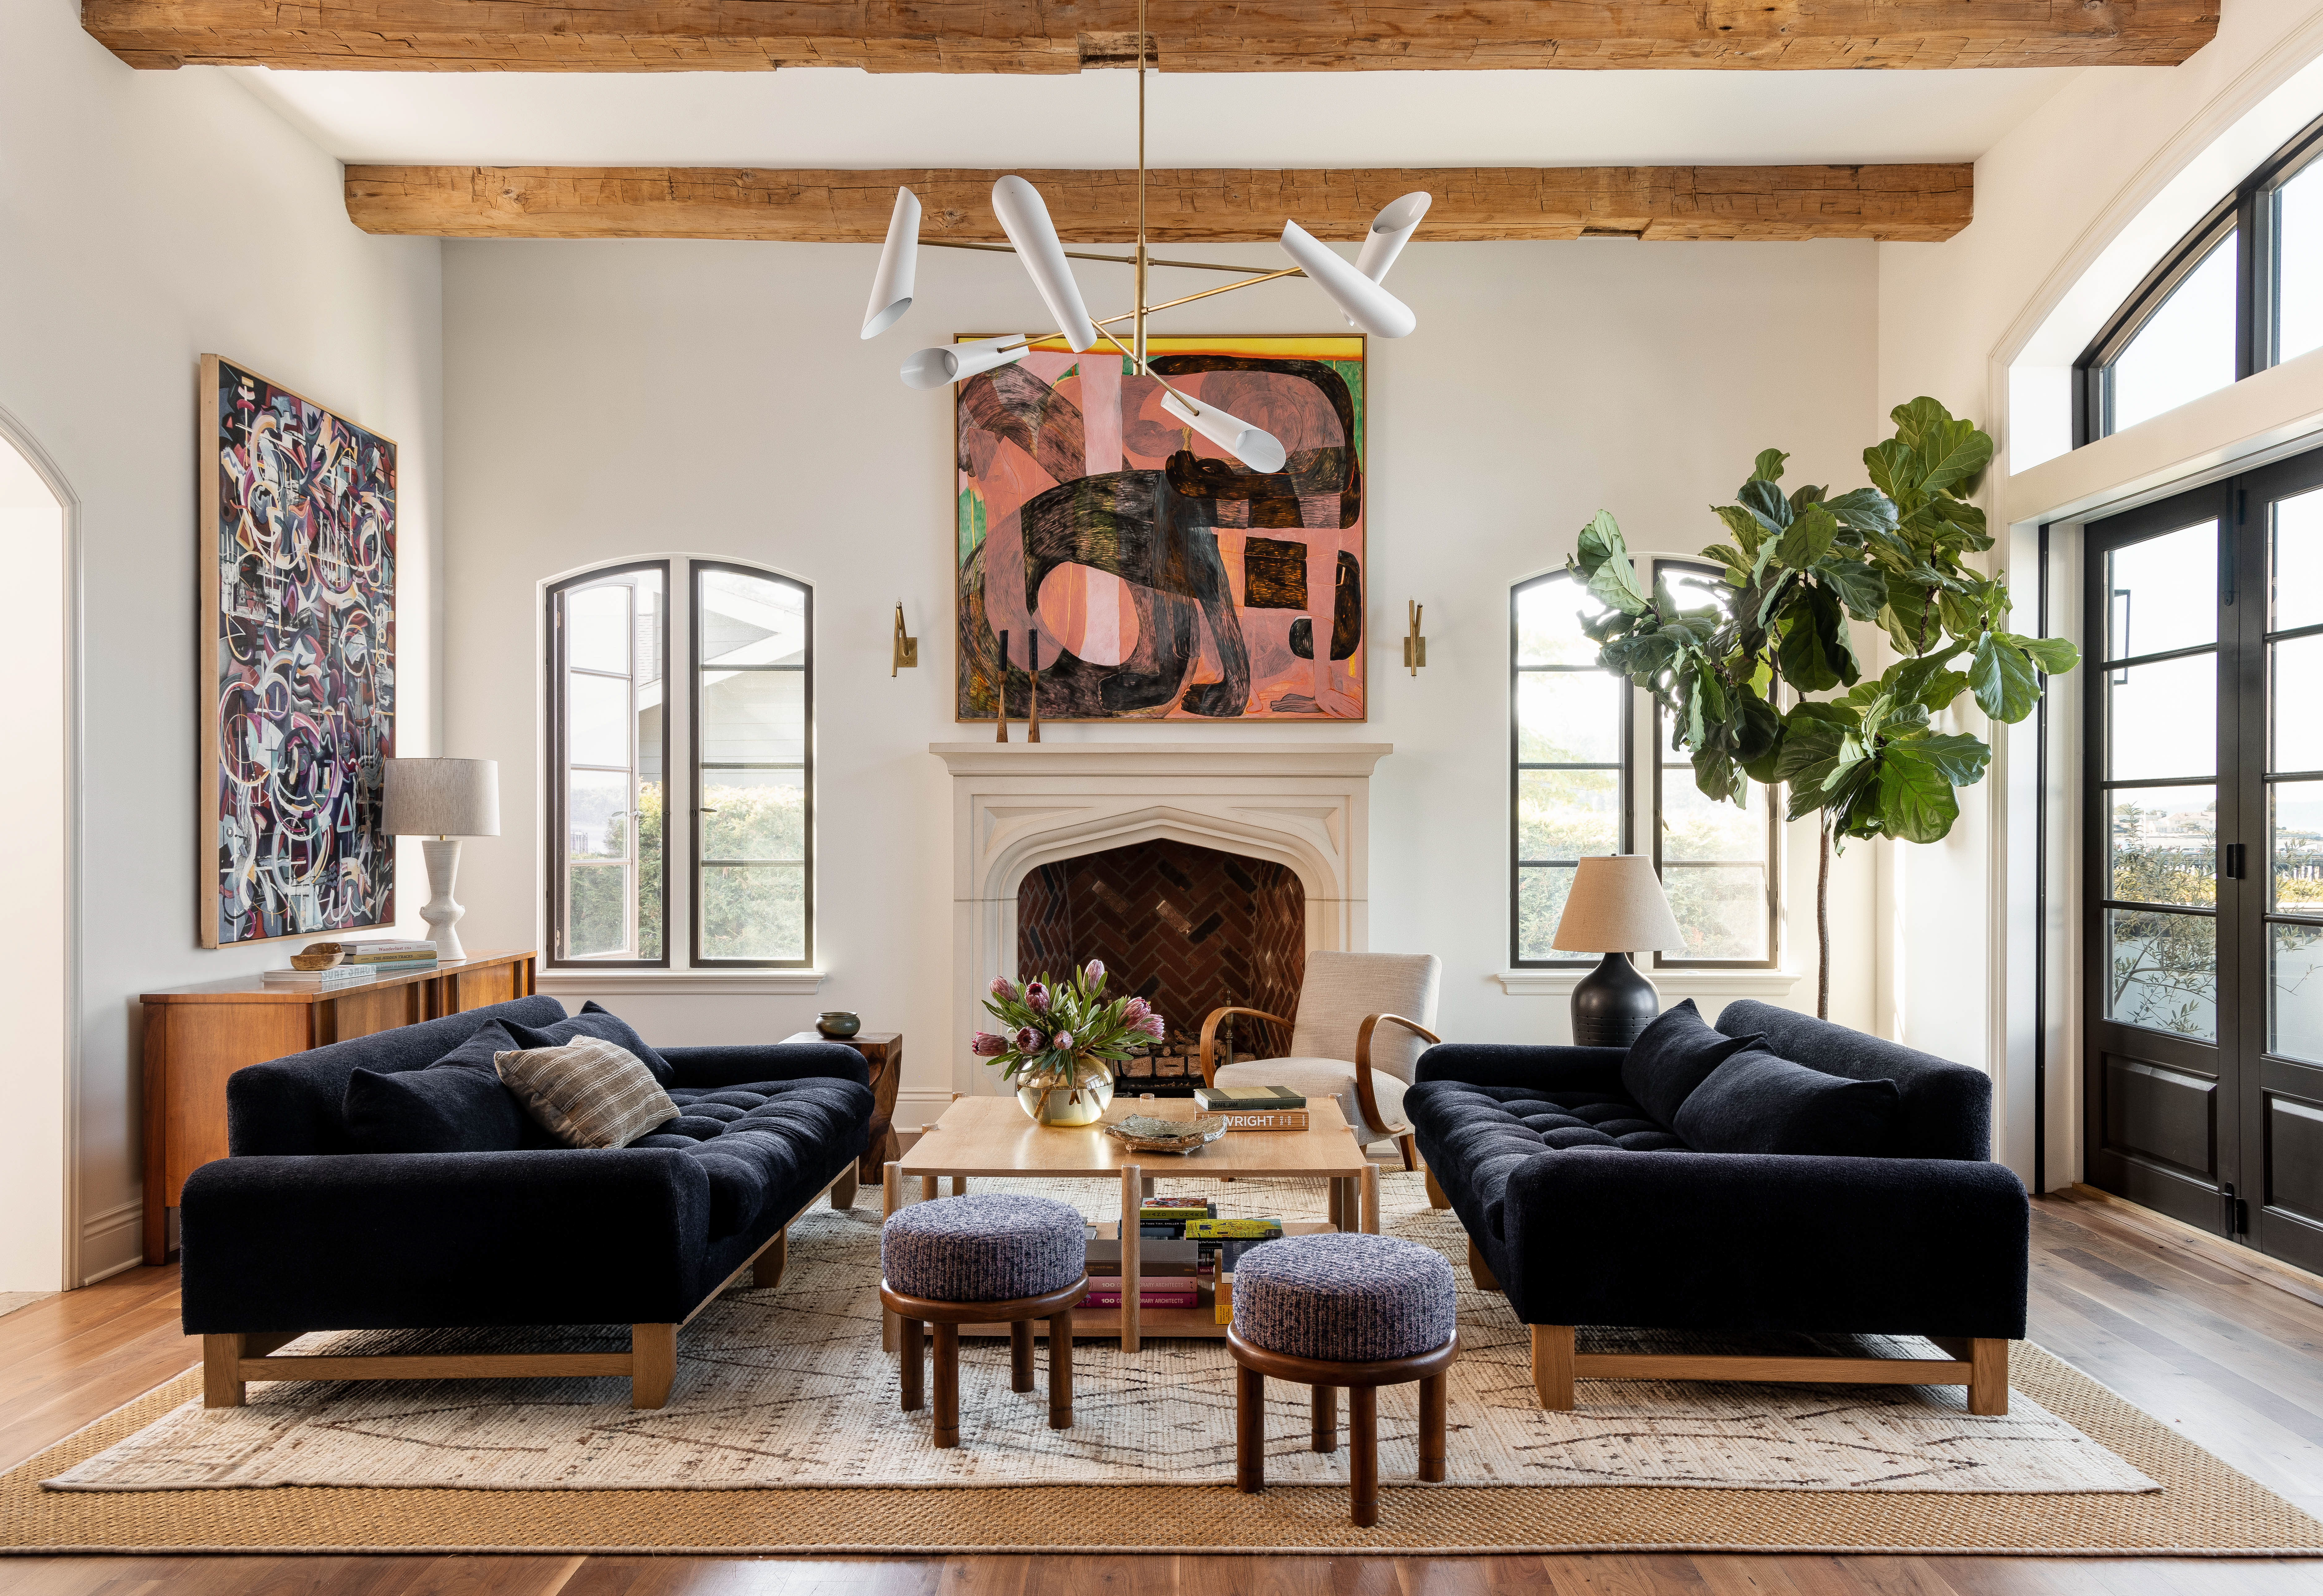 View of the fireplace, sofas, and artwork in the Lincoln Park renovation. The fireplace is the focal point, flanked by two sofas with colorful pillows. Artwork hangs above the mantel, adding a vibrant touch to the room.